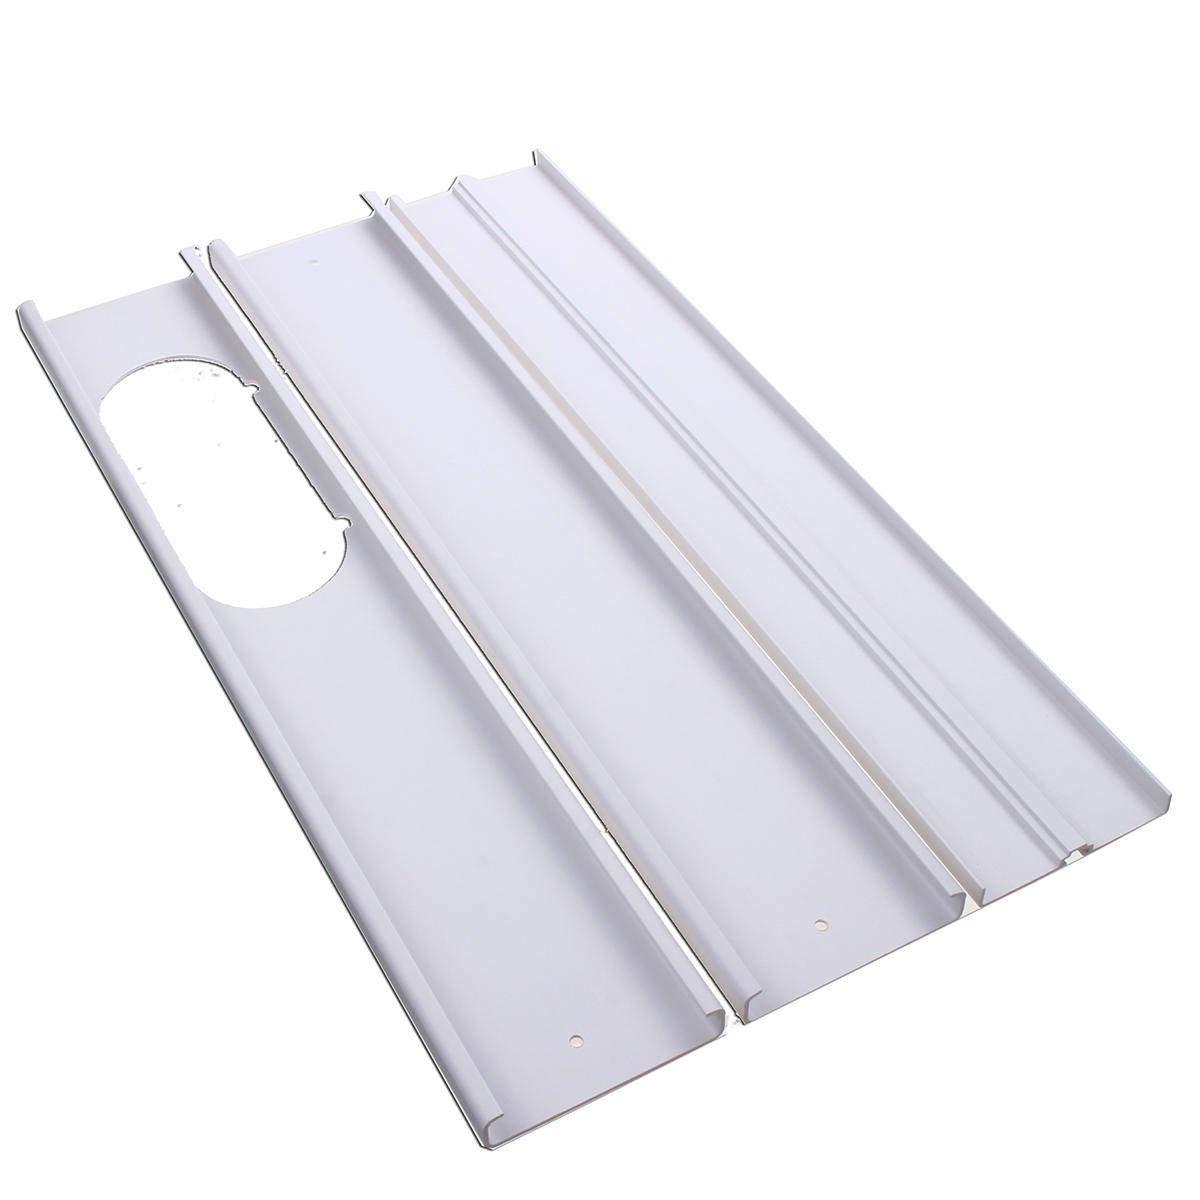 3Pcs 67.5-190cm Length Air Conditioner Wind Sheild Window Slide Kit Plate For Portable Air Conditioner